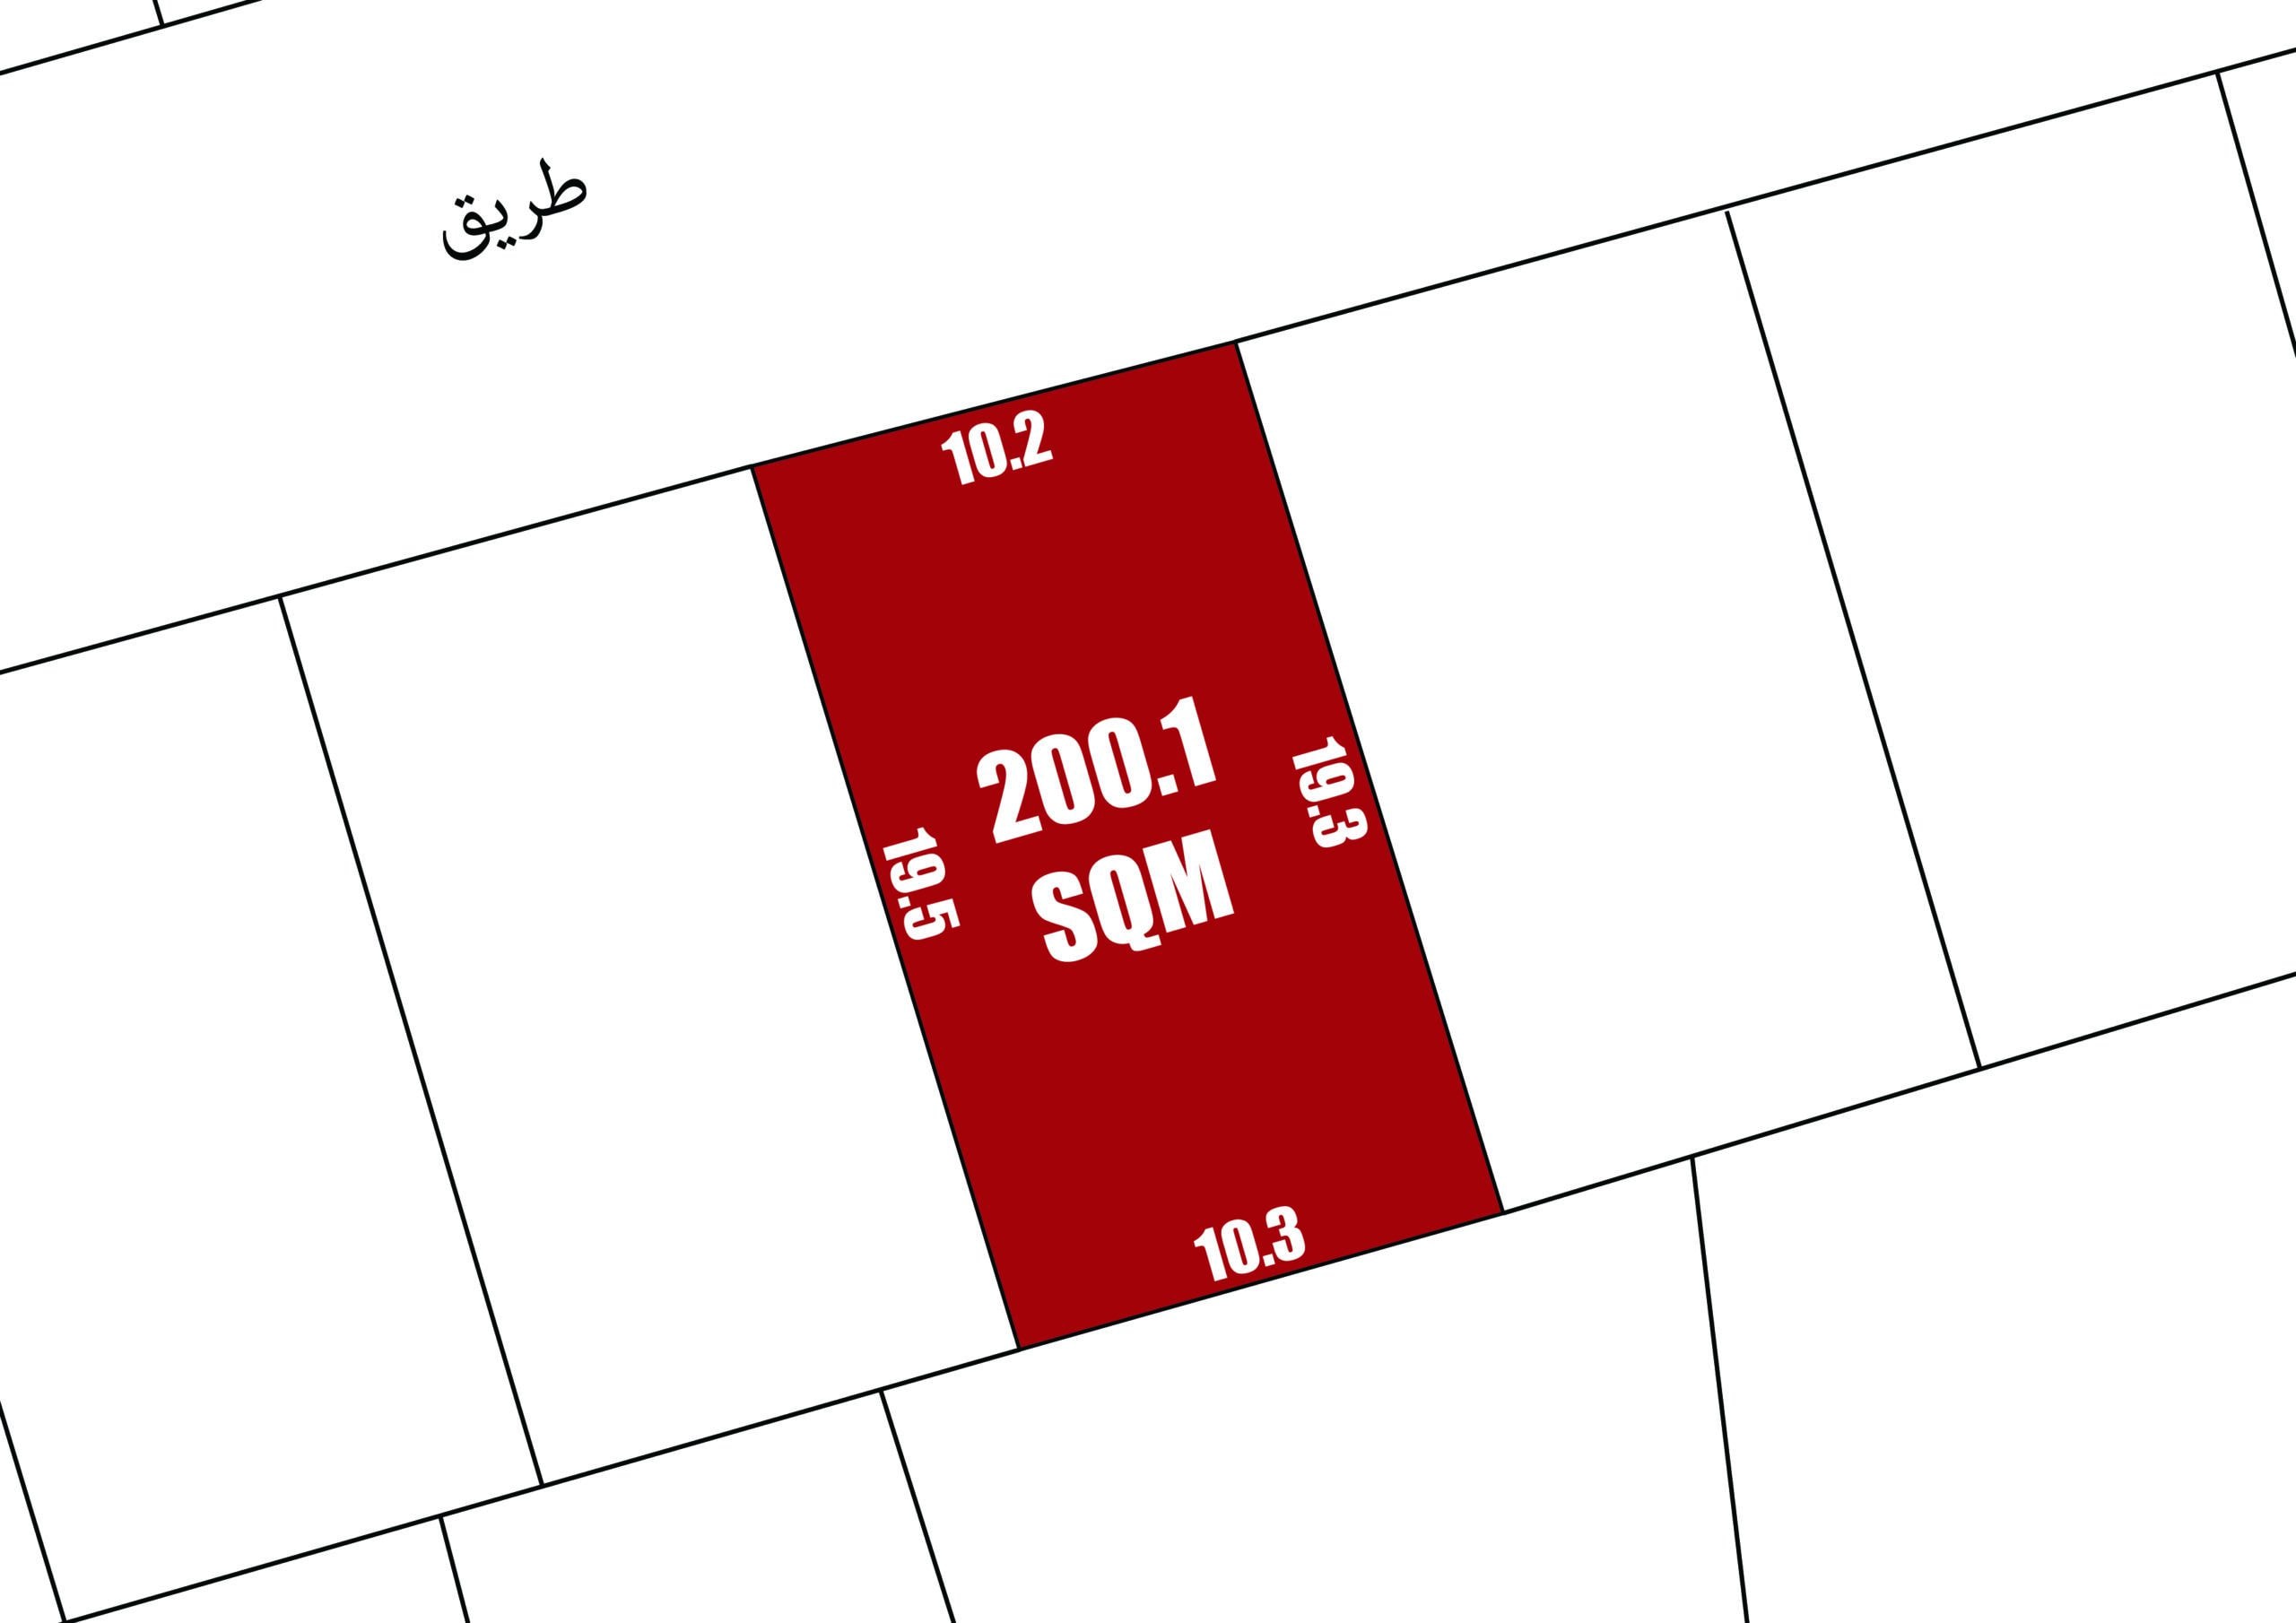 An aerial schematic of a residential property plot marked in red, labeled 